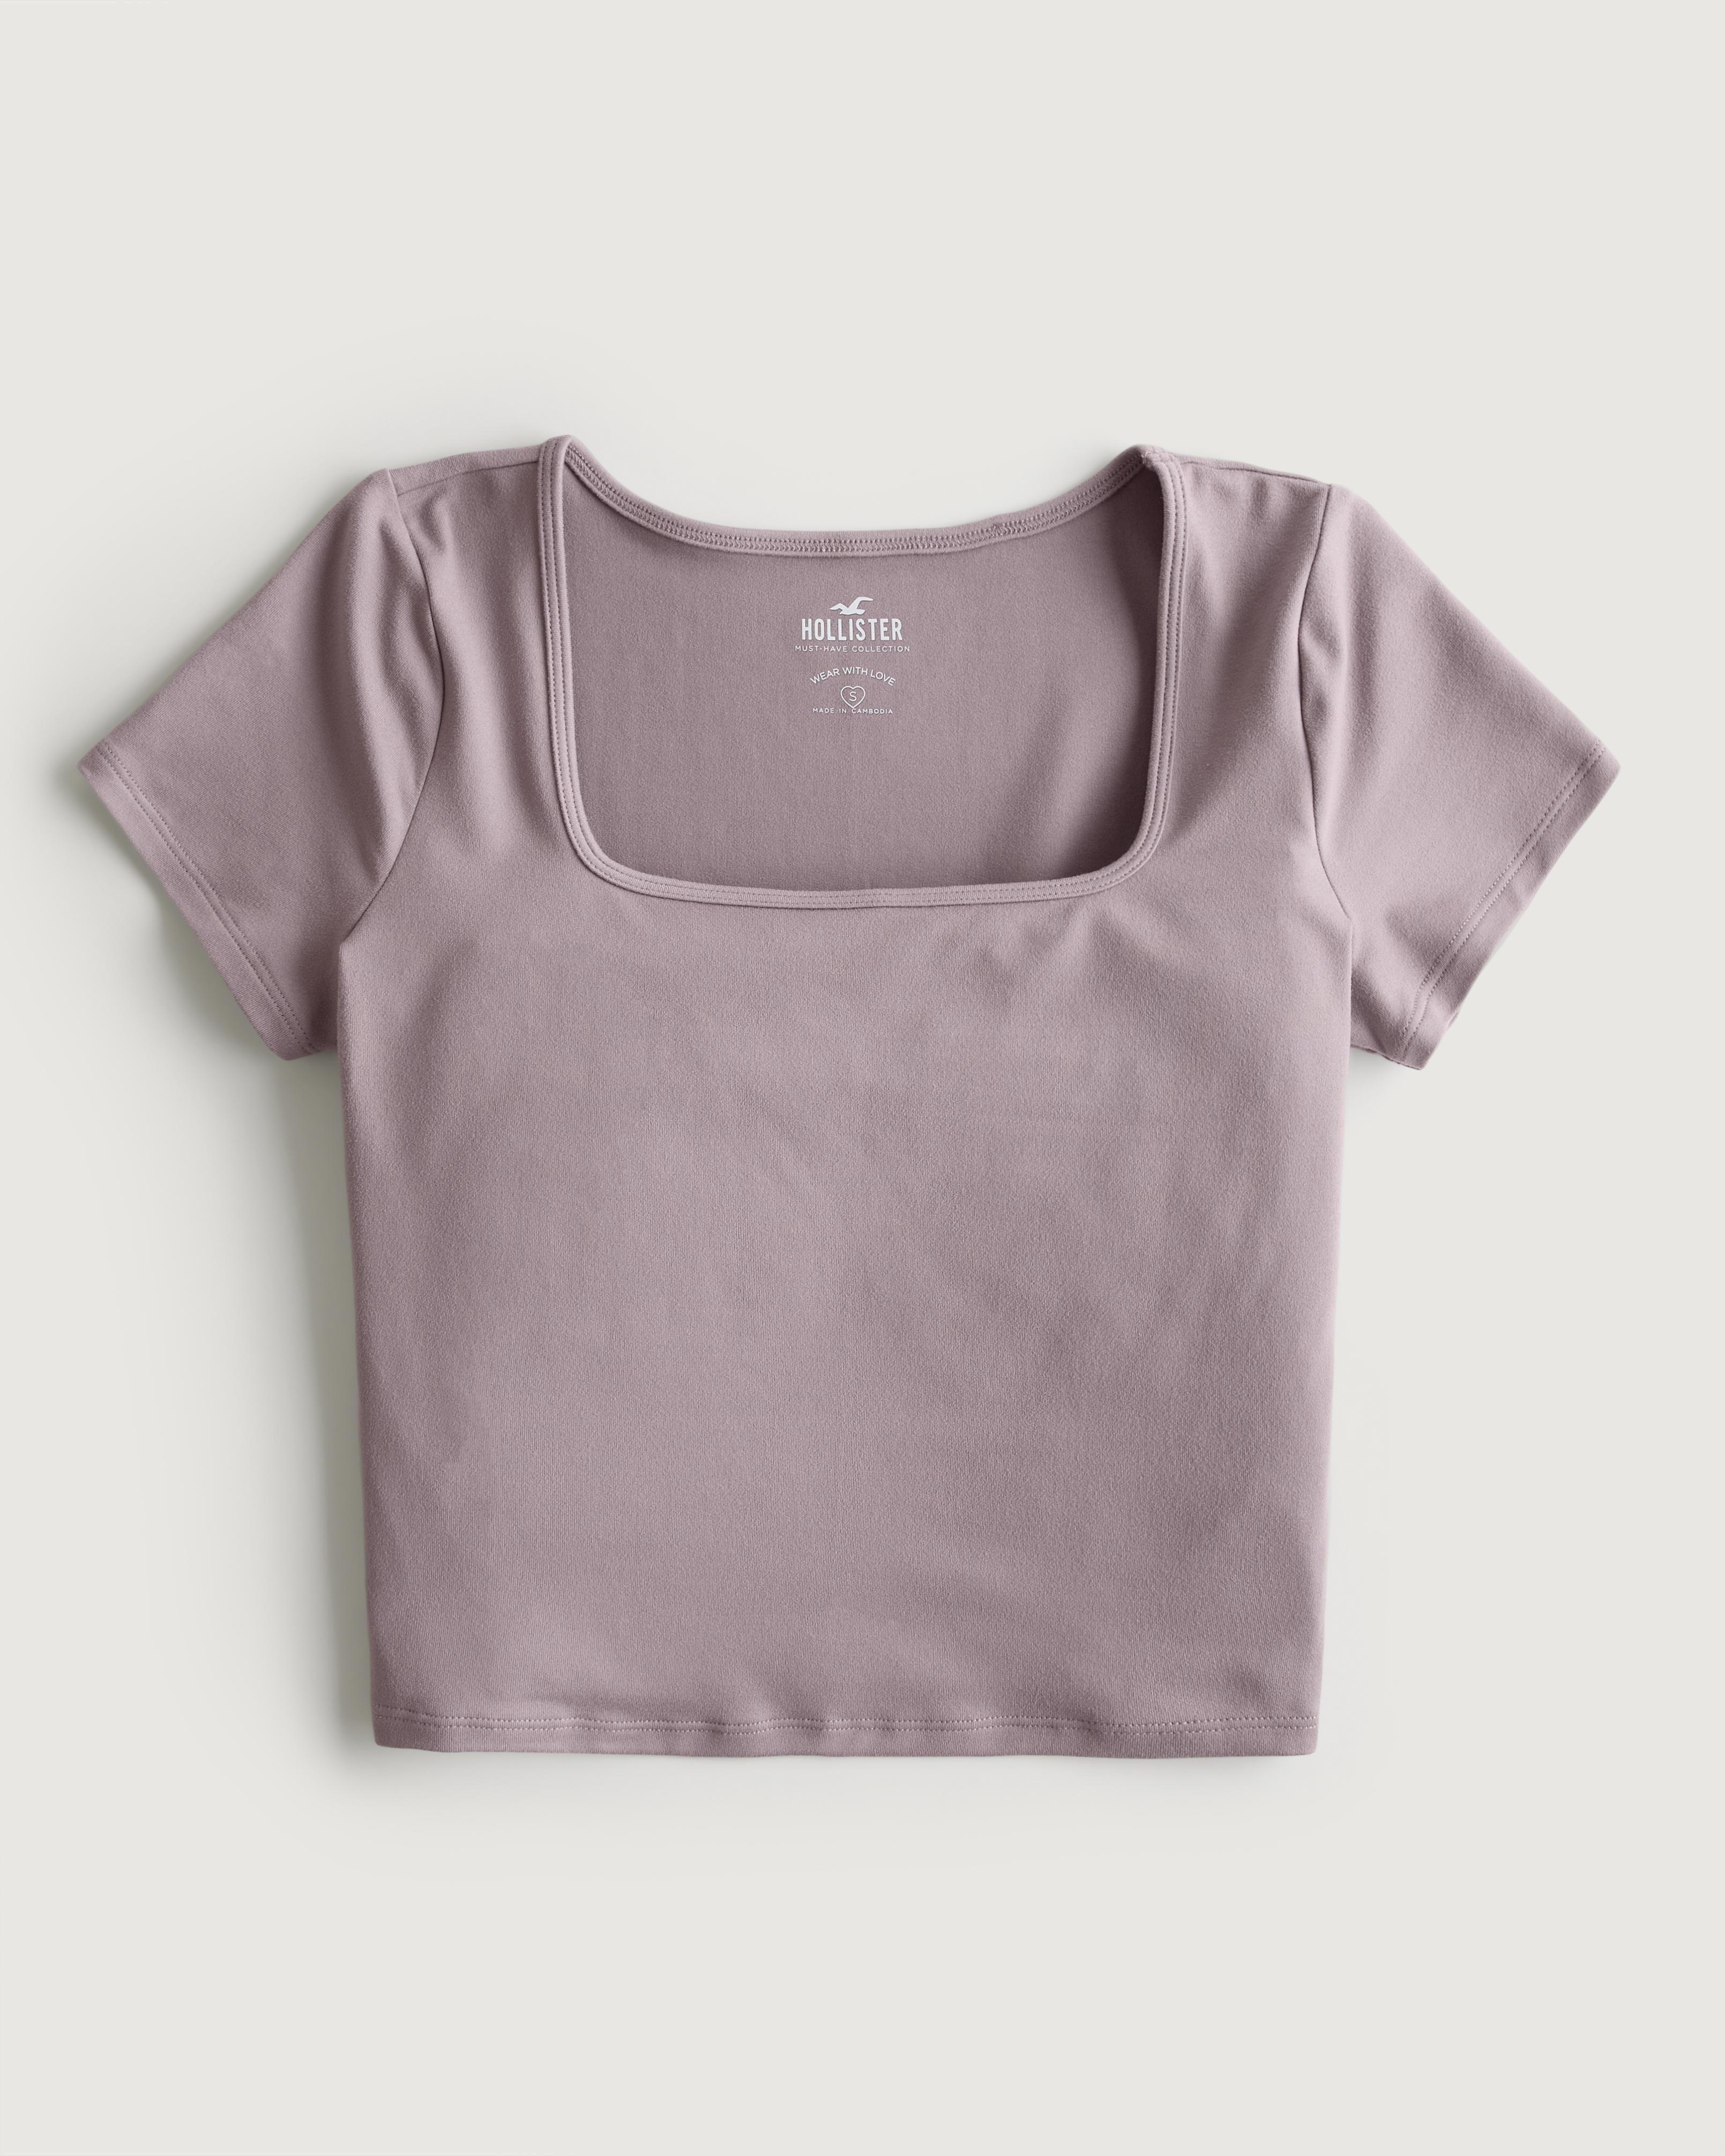 Hollister Seamless Fabric Square-neck Baby Tee in Grey